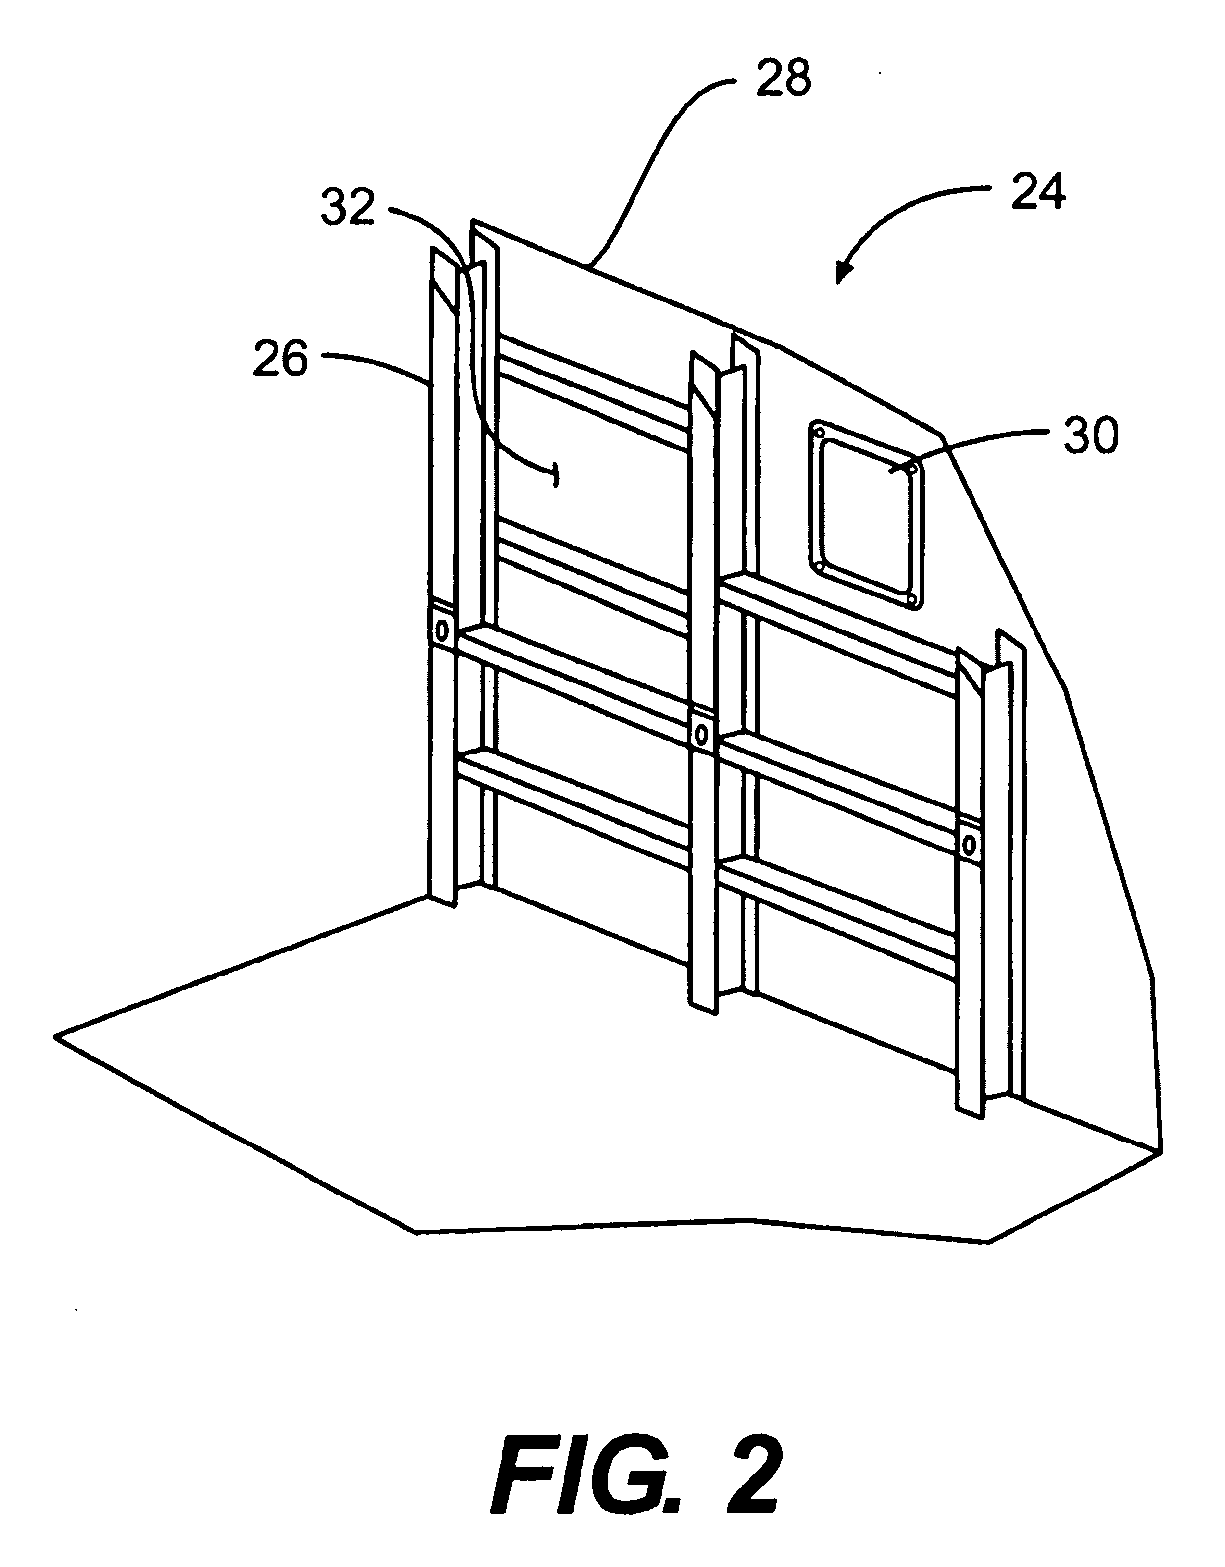 Acoustic absorption system for an aircraft airframe